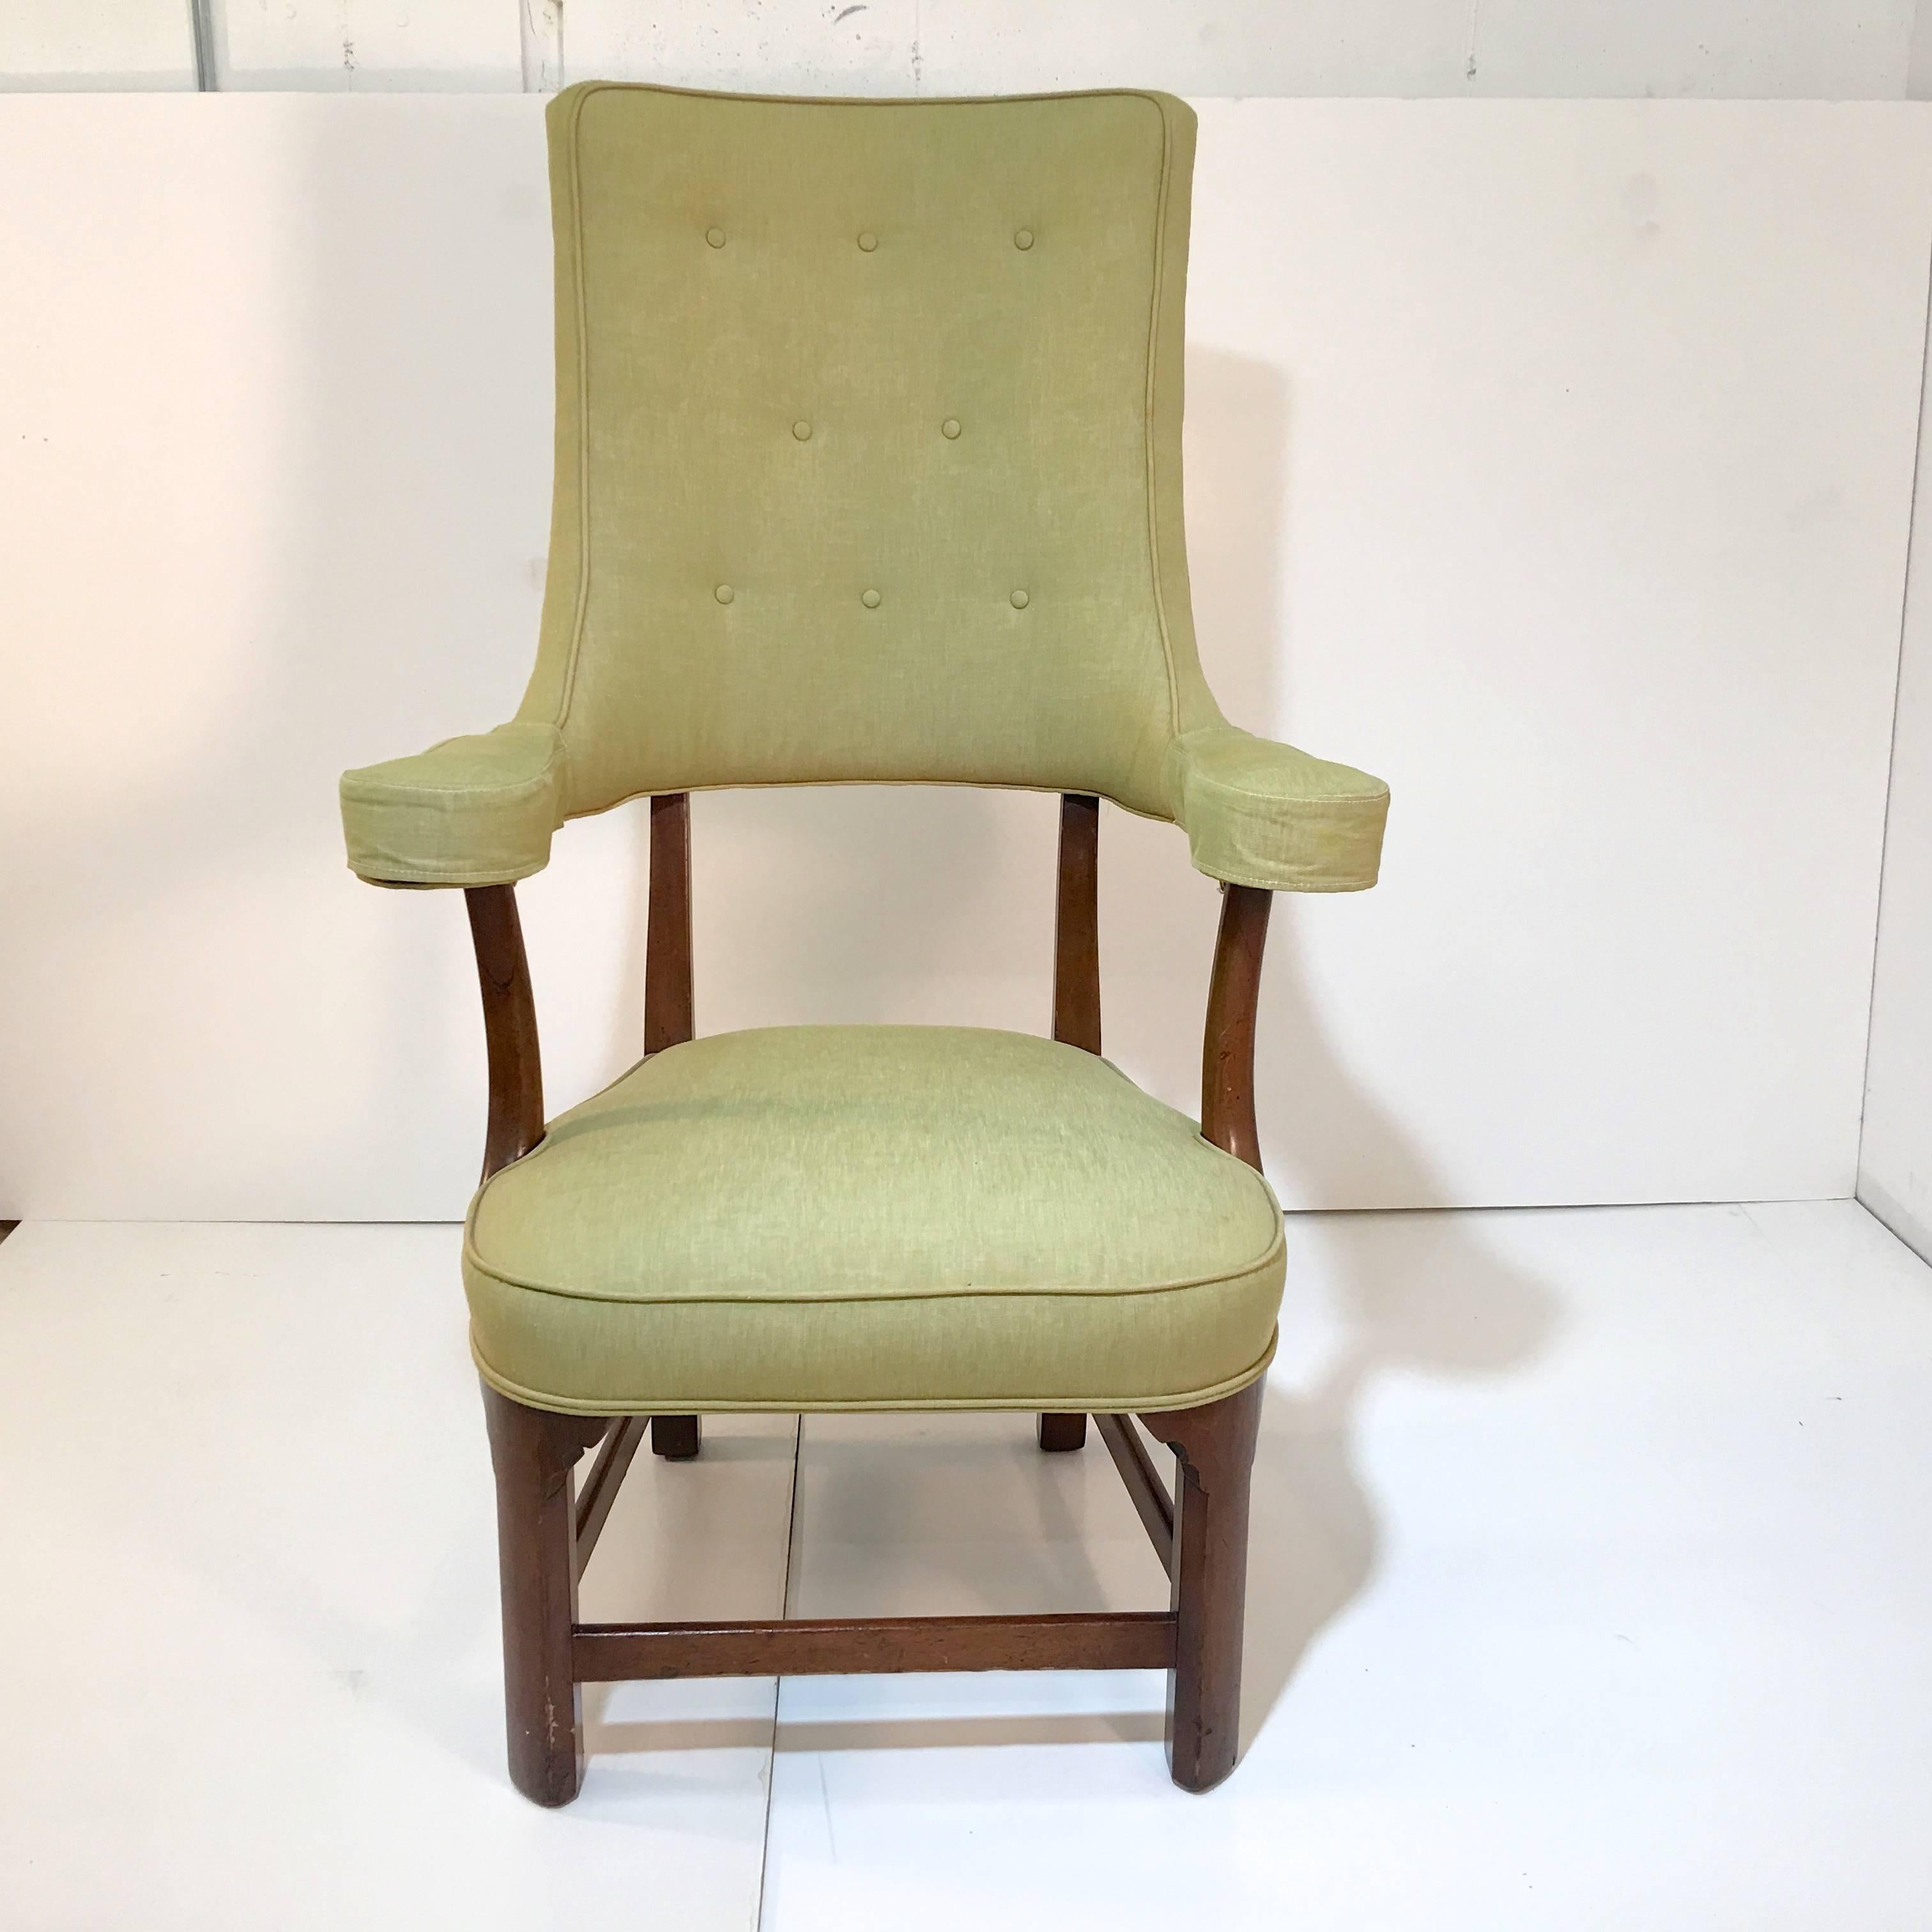 This stately high-back armchair was originally commissioned in the mid-1960s by top Boston interior decorator, George Clark, on behalf of a prominent family, from Florian Papp in New York City. The Florian Papp Workshop made Fine custom